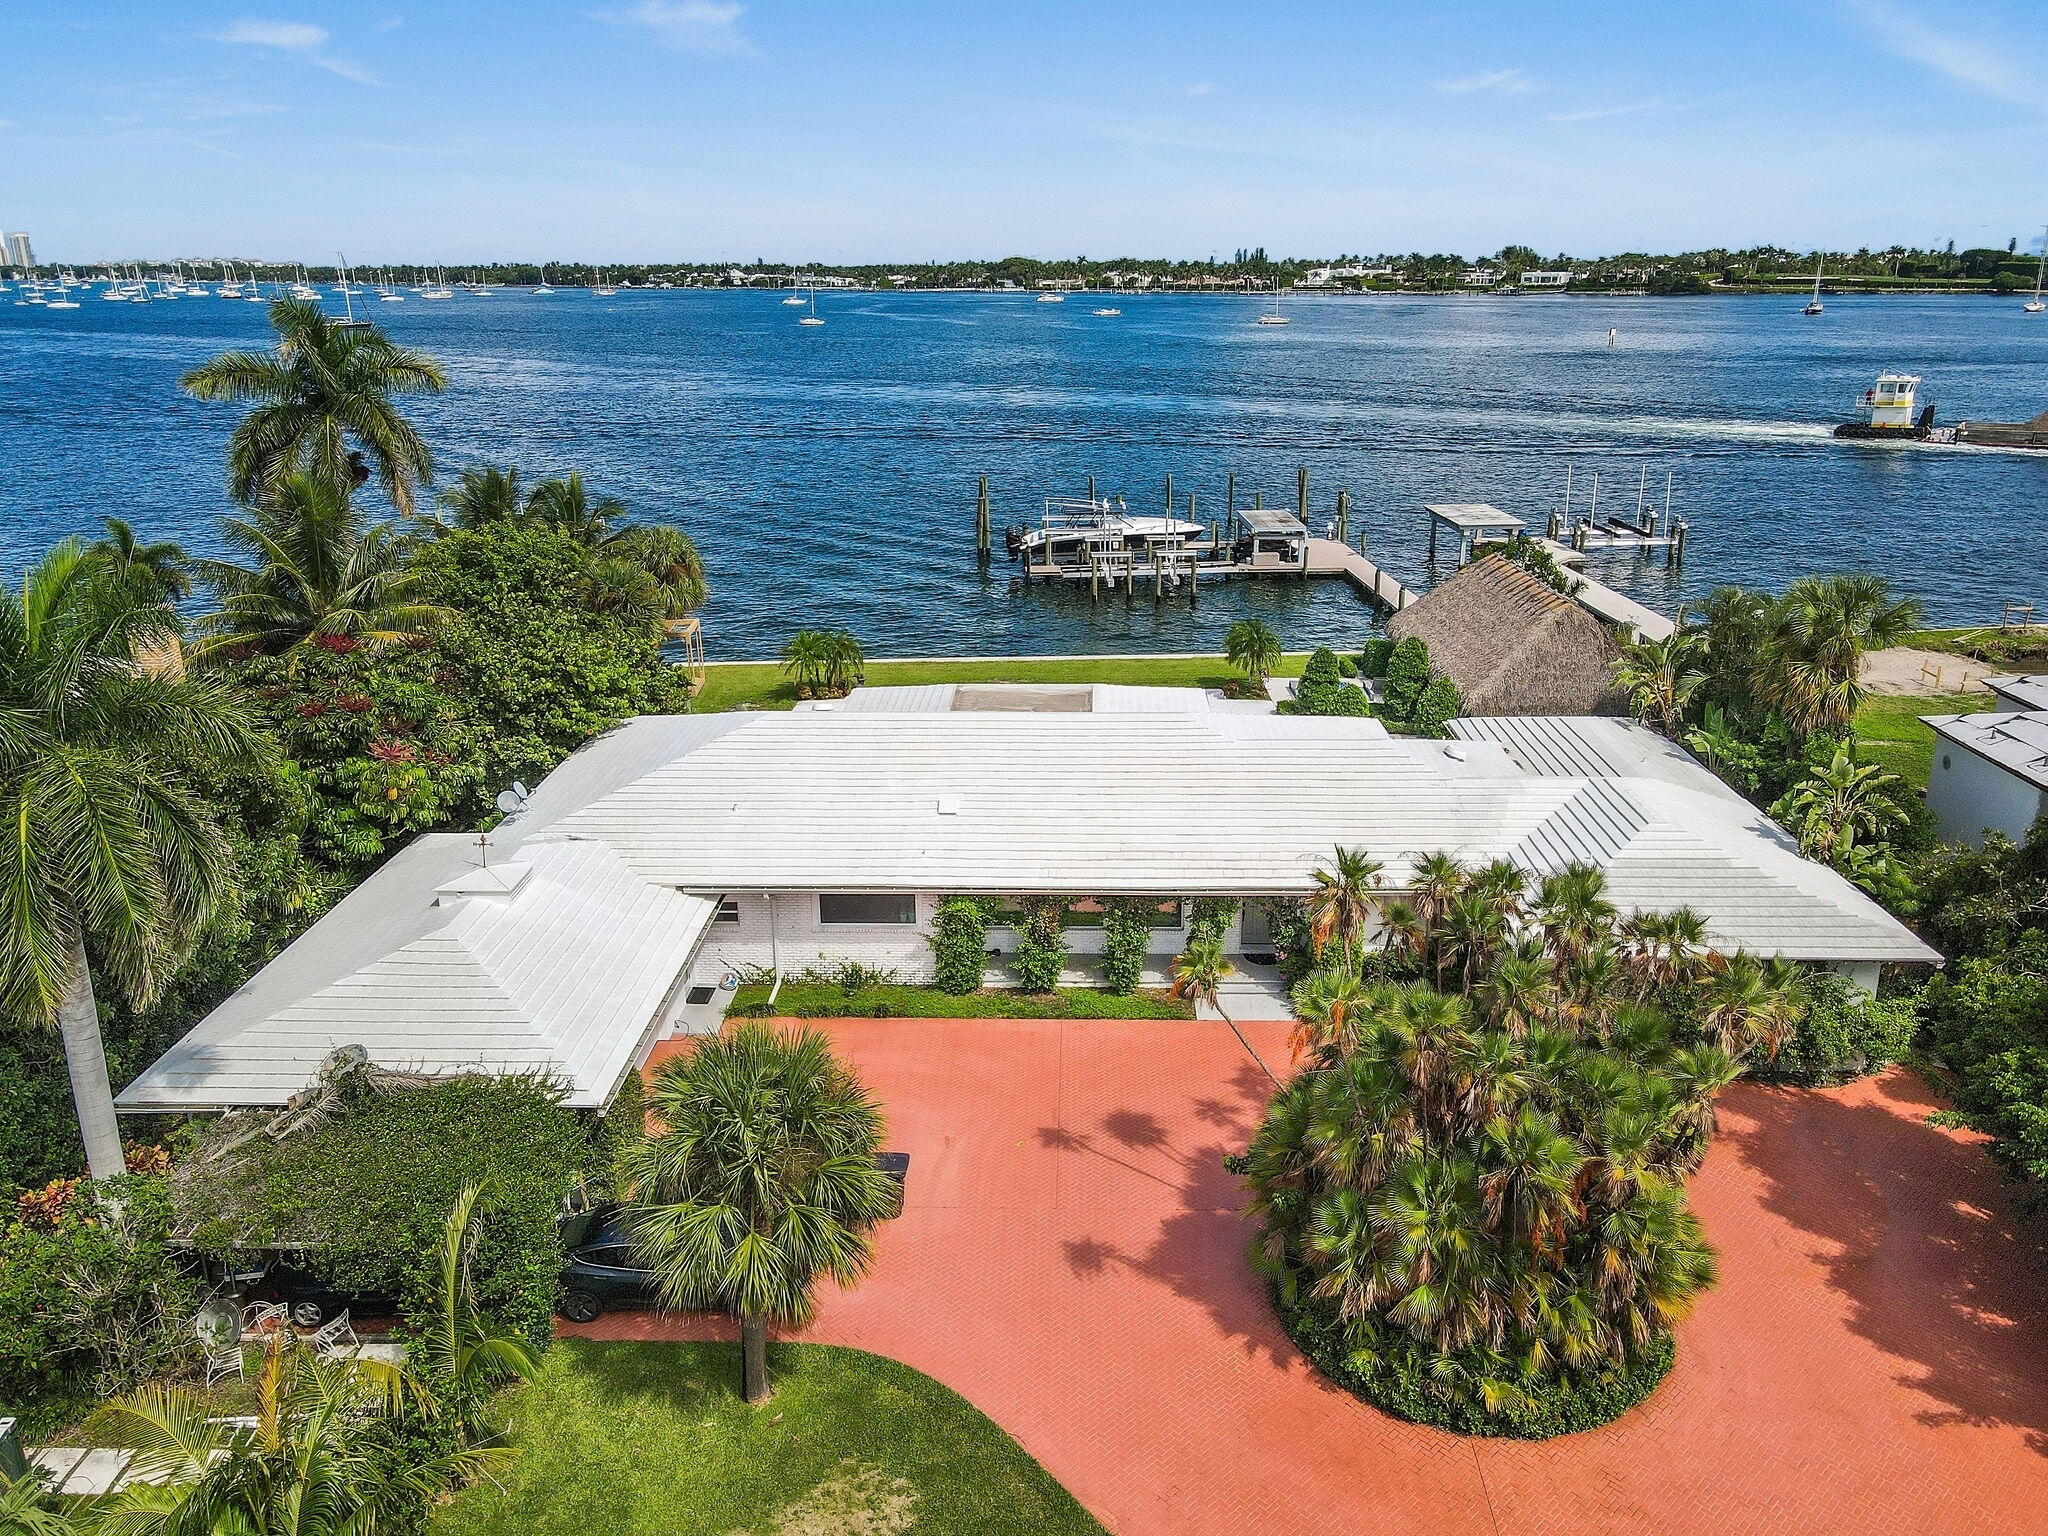 Single Family Home at Northwood Shores, West Palm Beach, FL 33407